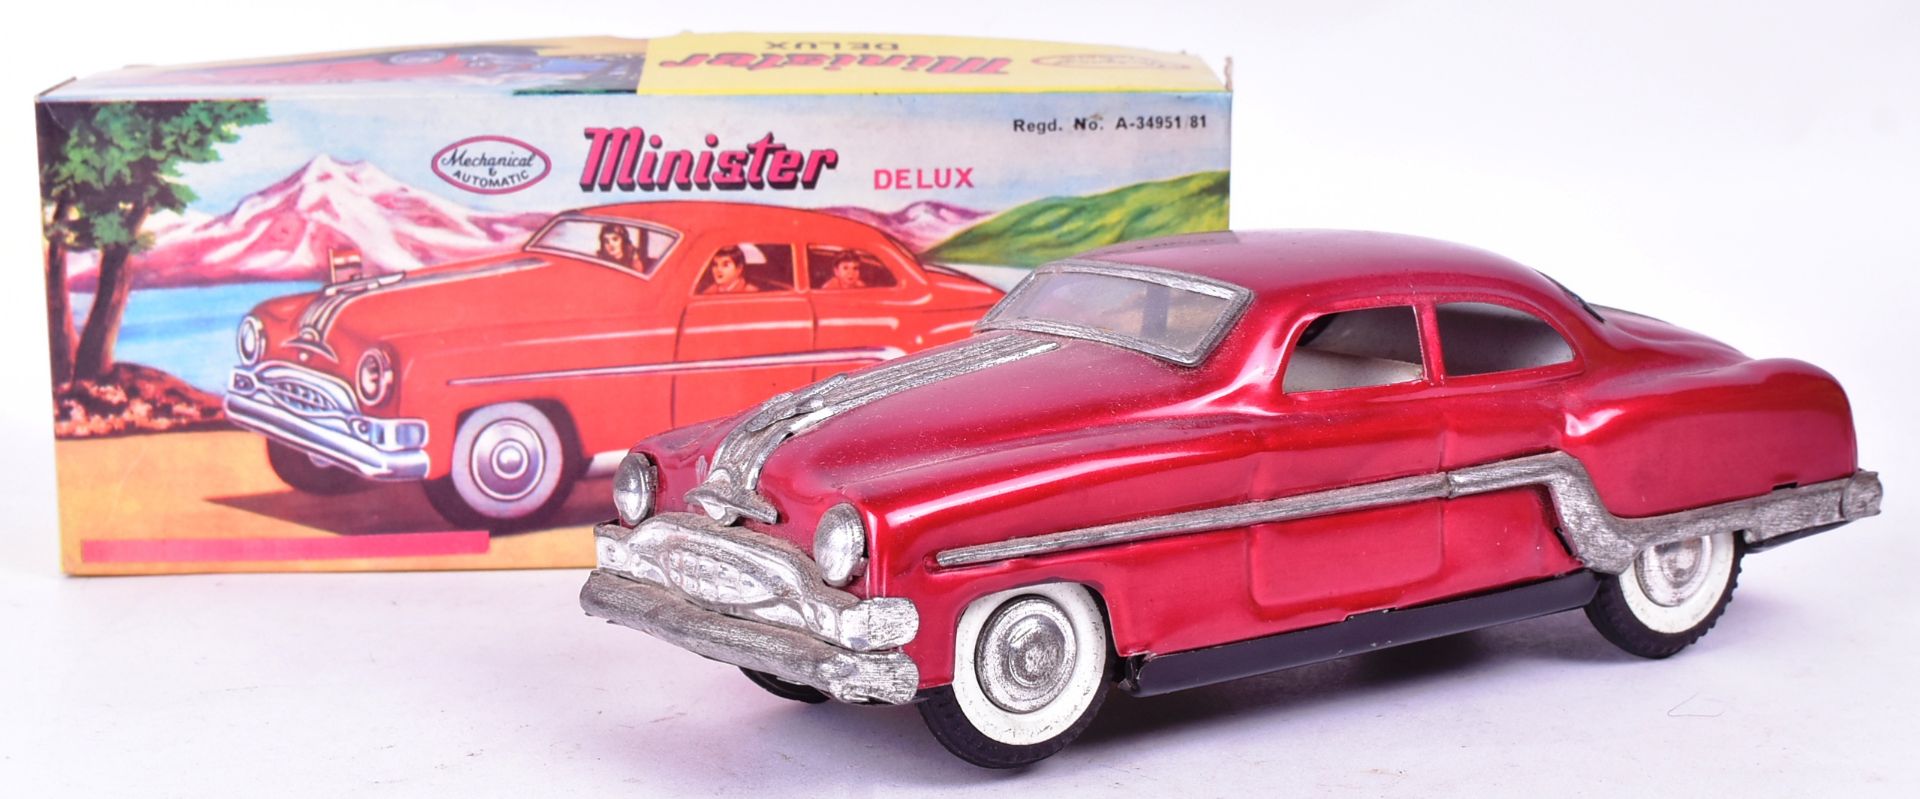 TINPLATE TOYS - X3 VINTAGE MINISTER DELUX TINPLATE TOY CARS - Image 4 of 5